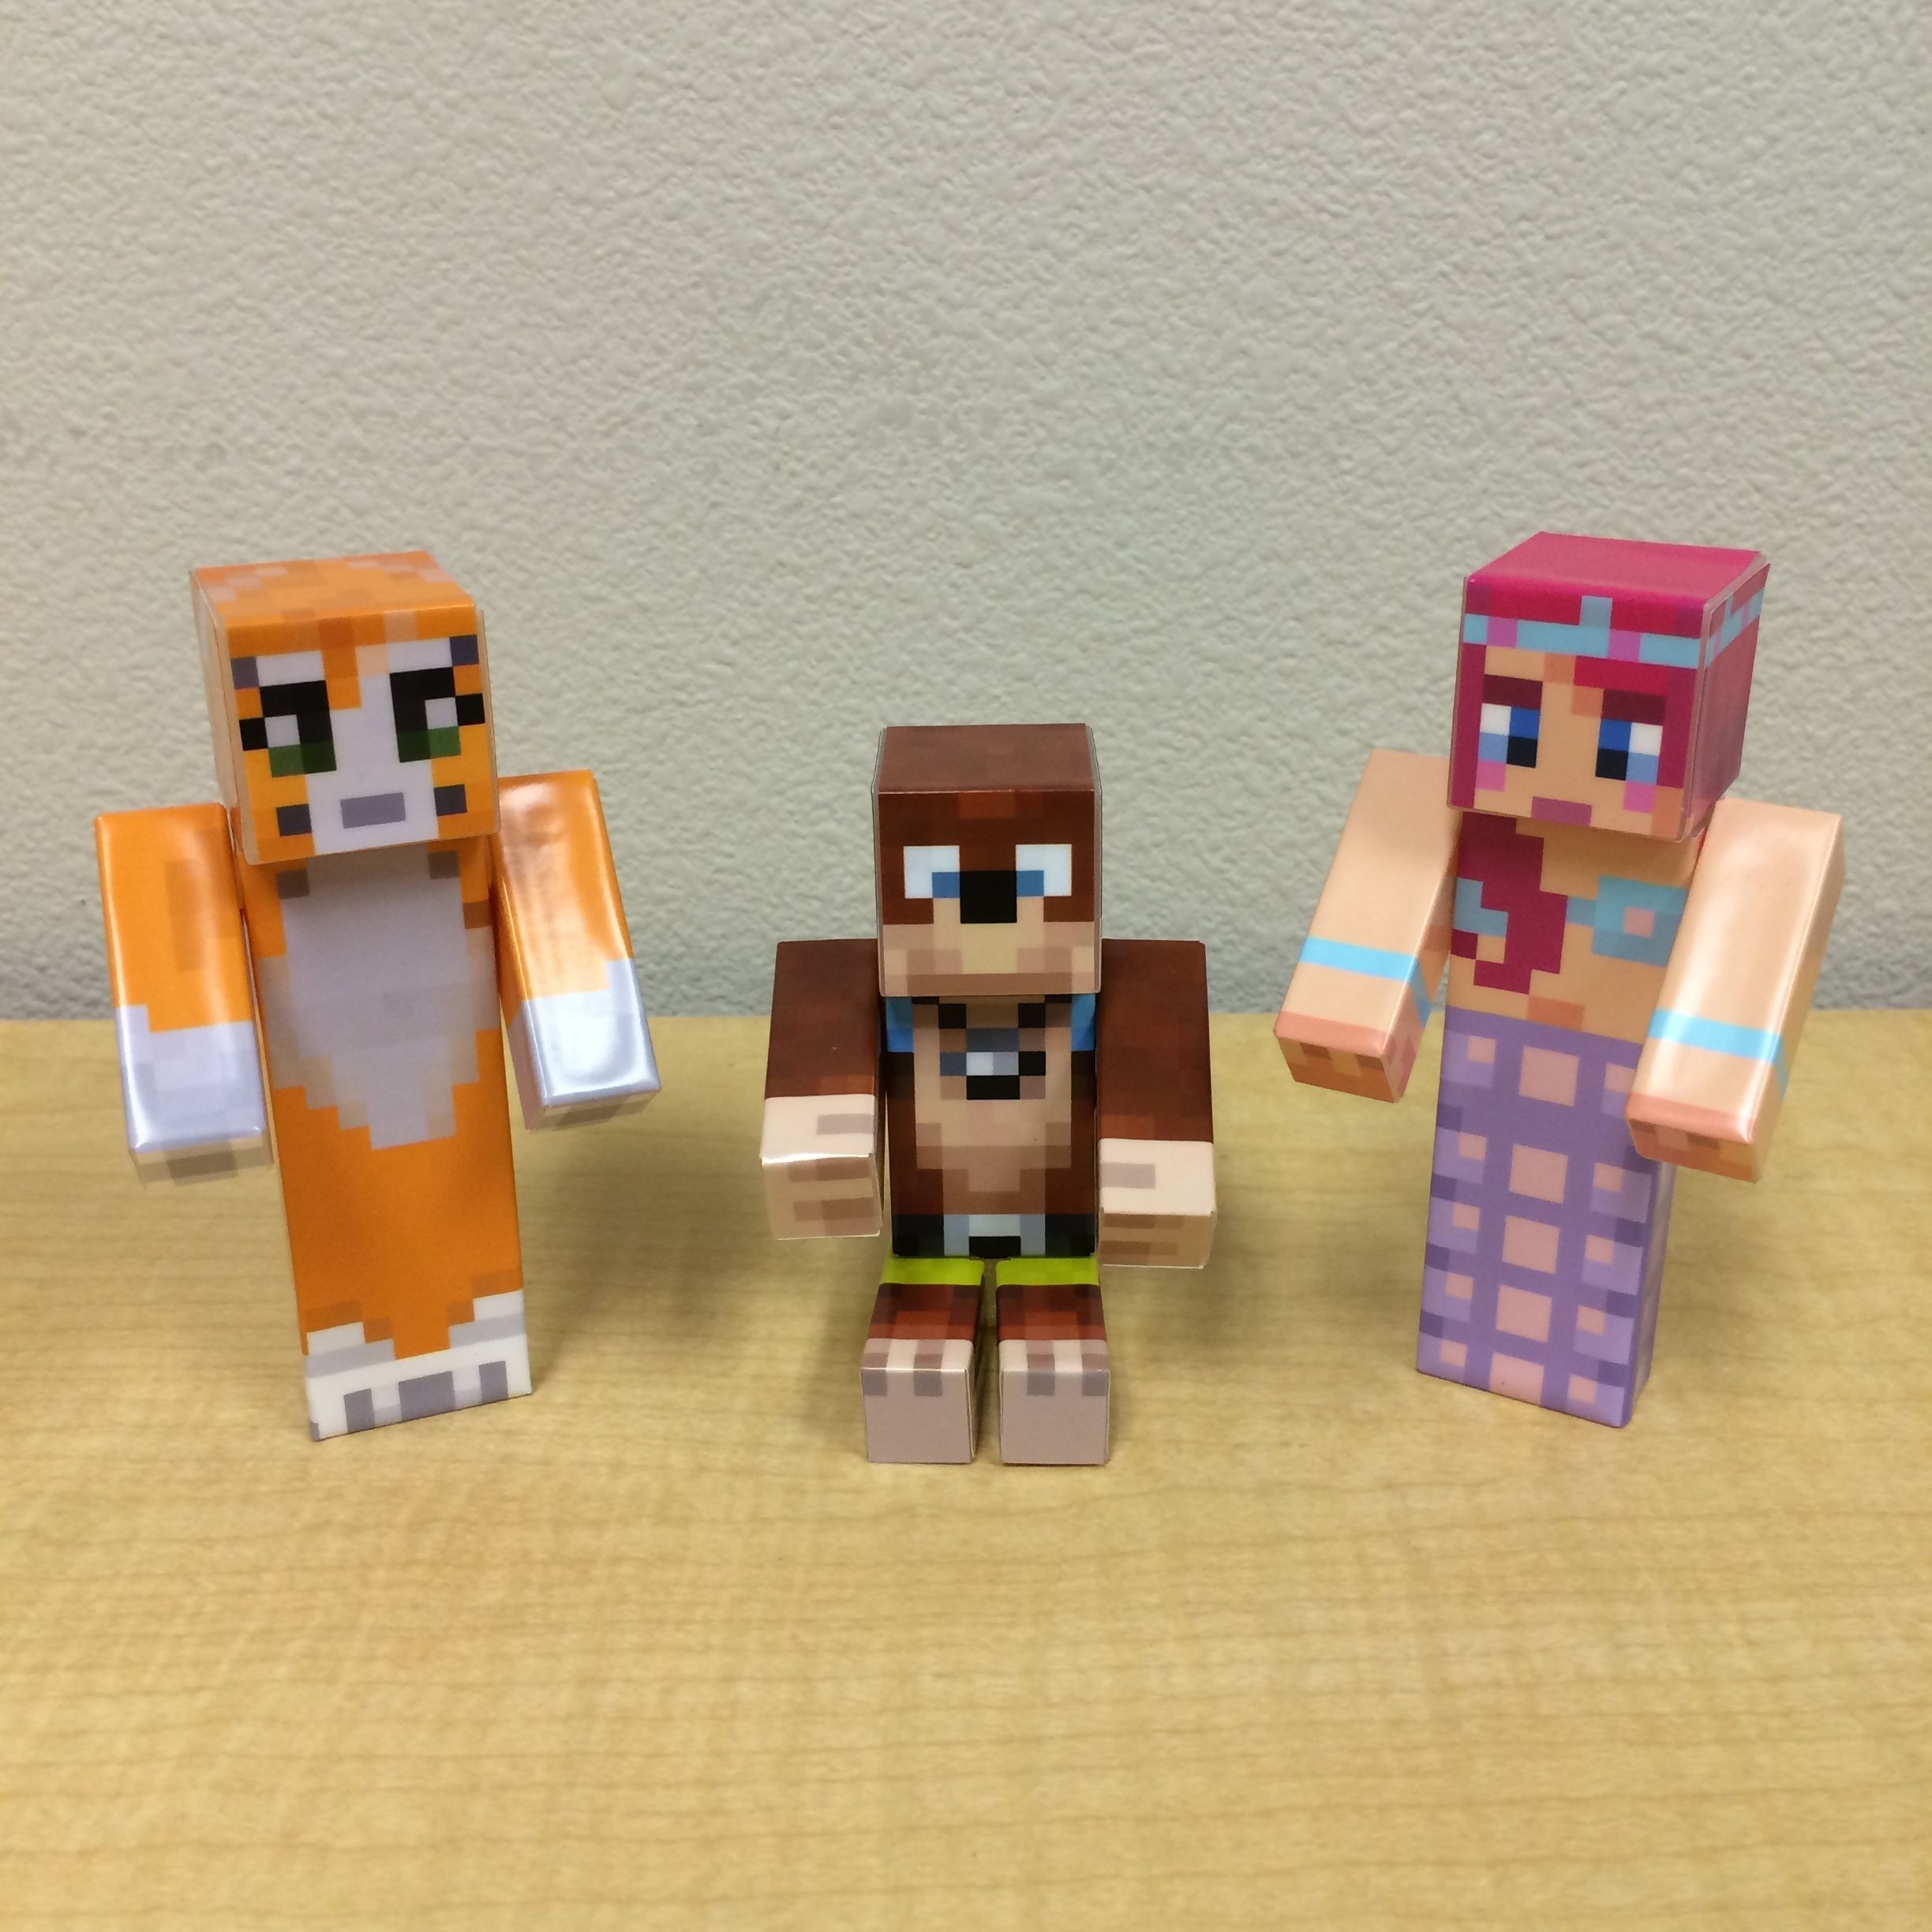 Minecraft Papercraft Review Check Out Our Custom toys for Minecraft Get One Made with Your